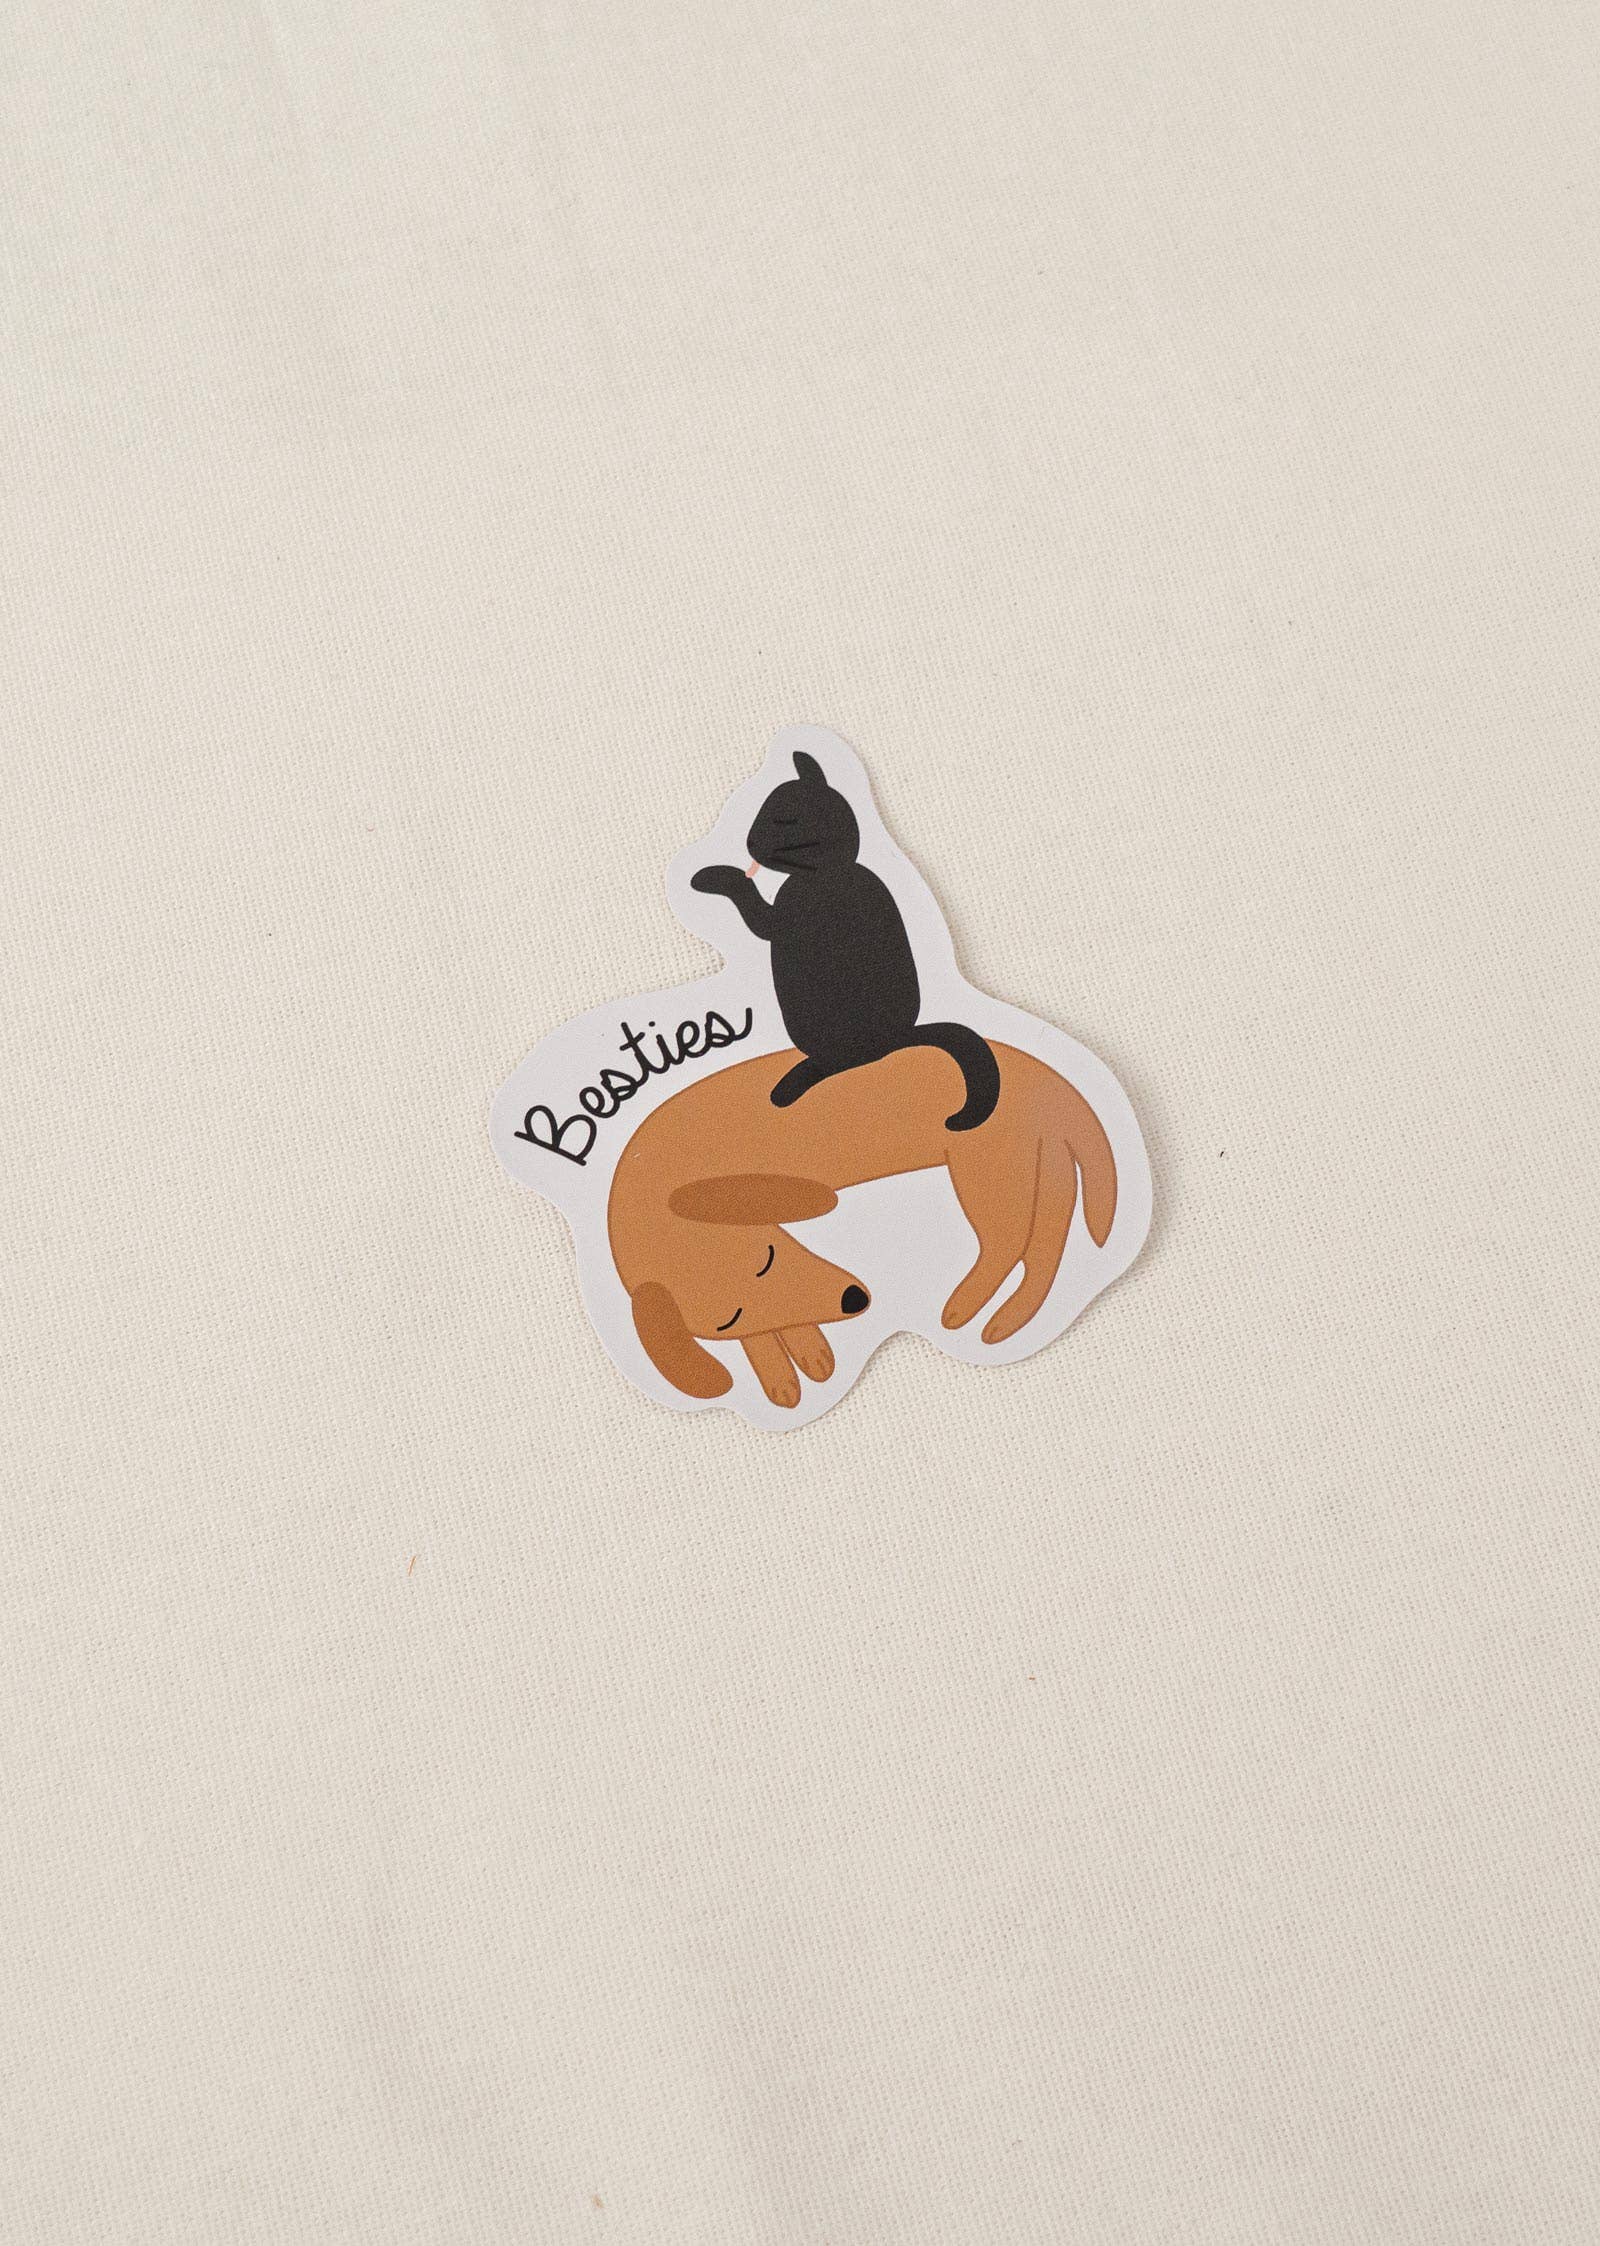 Besties - Vinyl Sticker - Out of the Blue